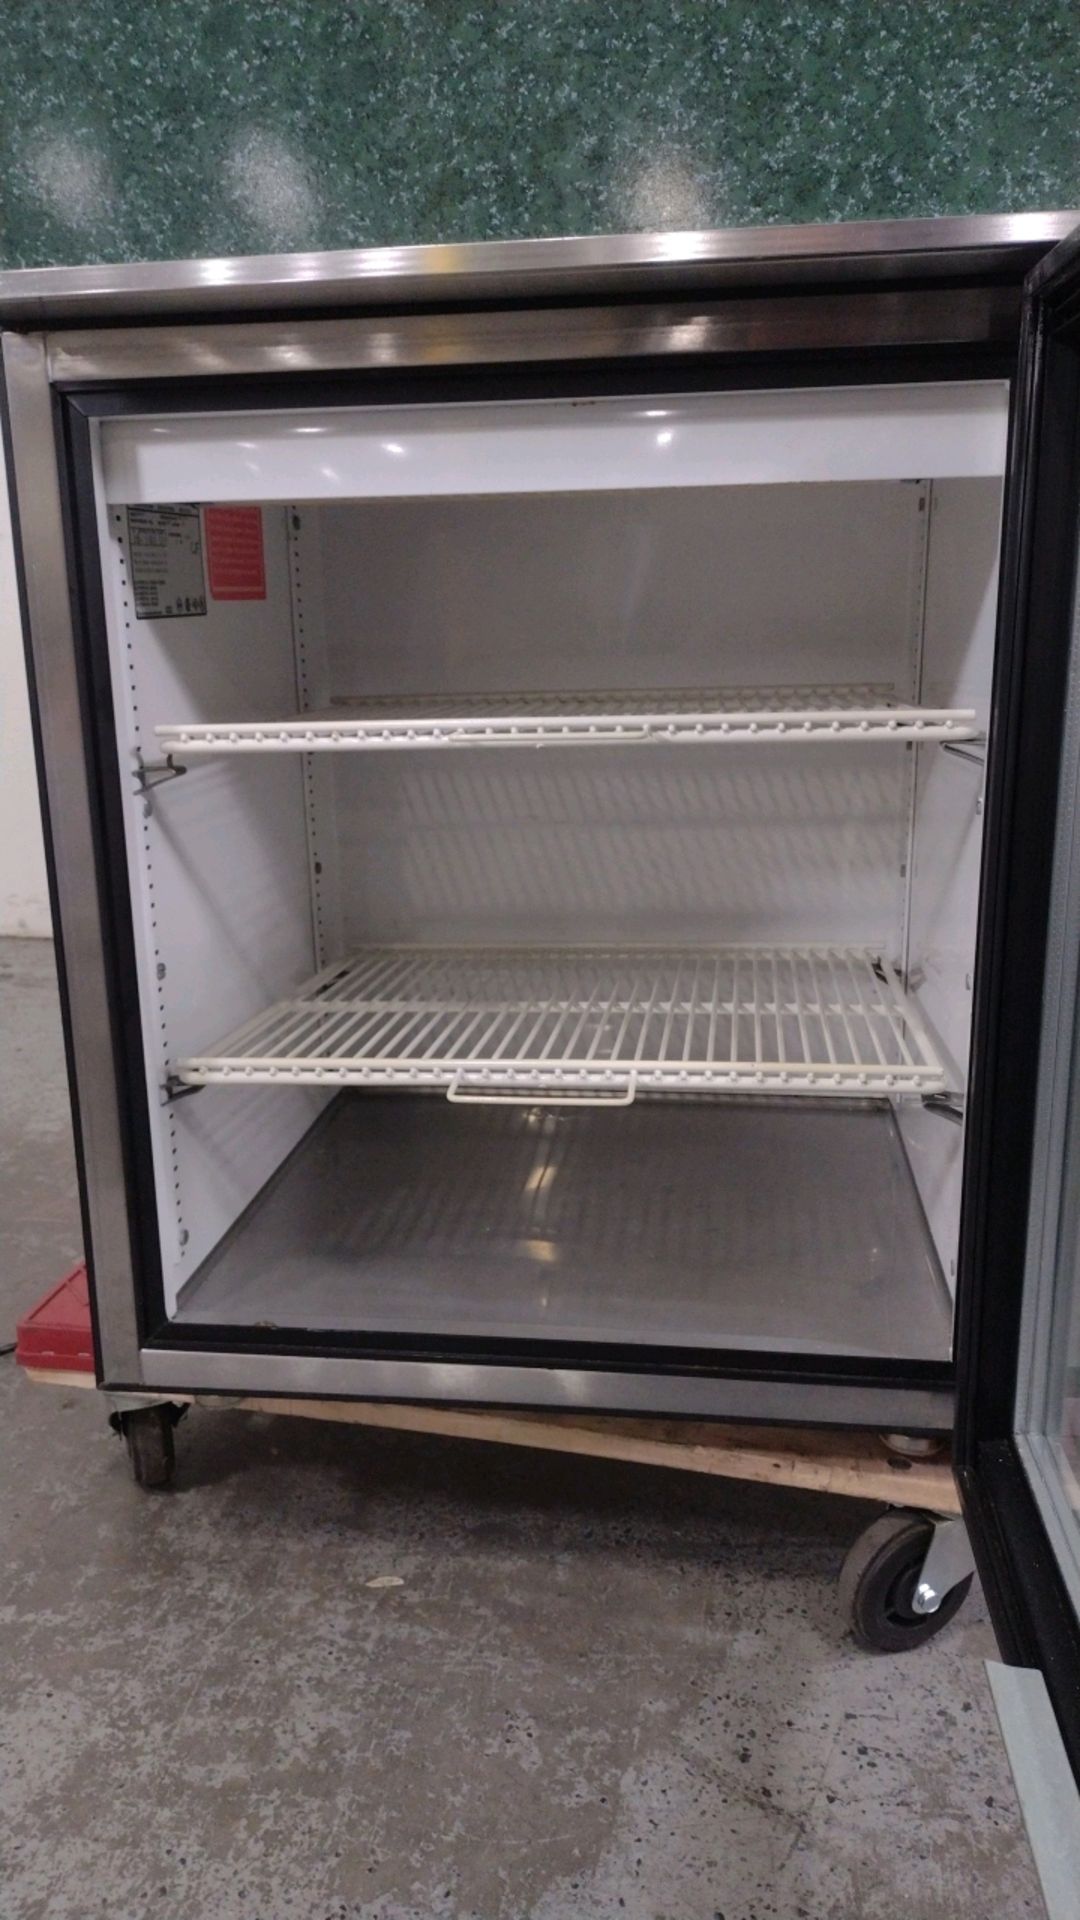 TRUE GDM-5 COUNTERTOP REFRIGERATOR LOCATED AT 1825 S. 43RD AVE SUITE B2 PHOENIX AZ 85009 - Image 2 of 3